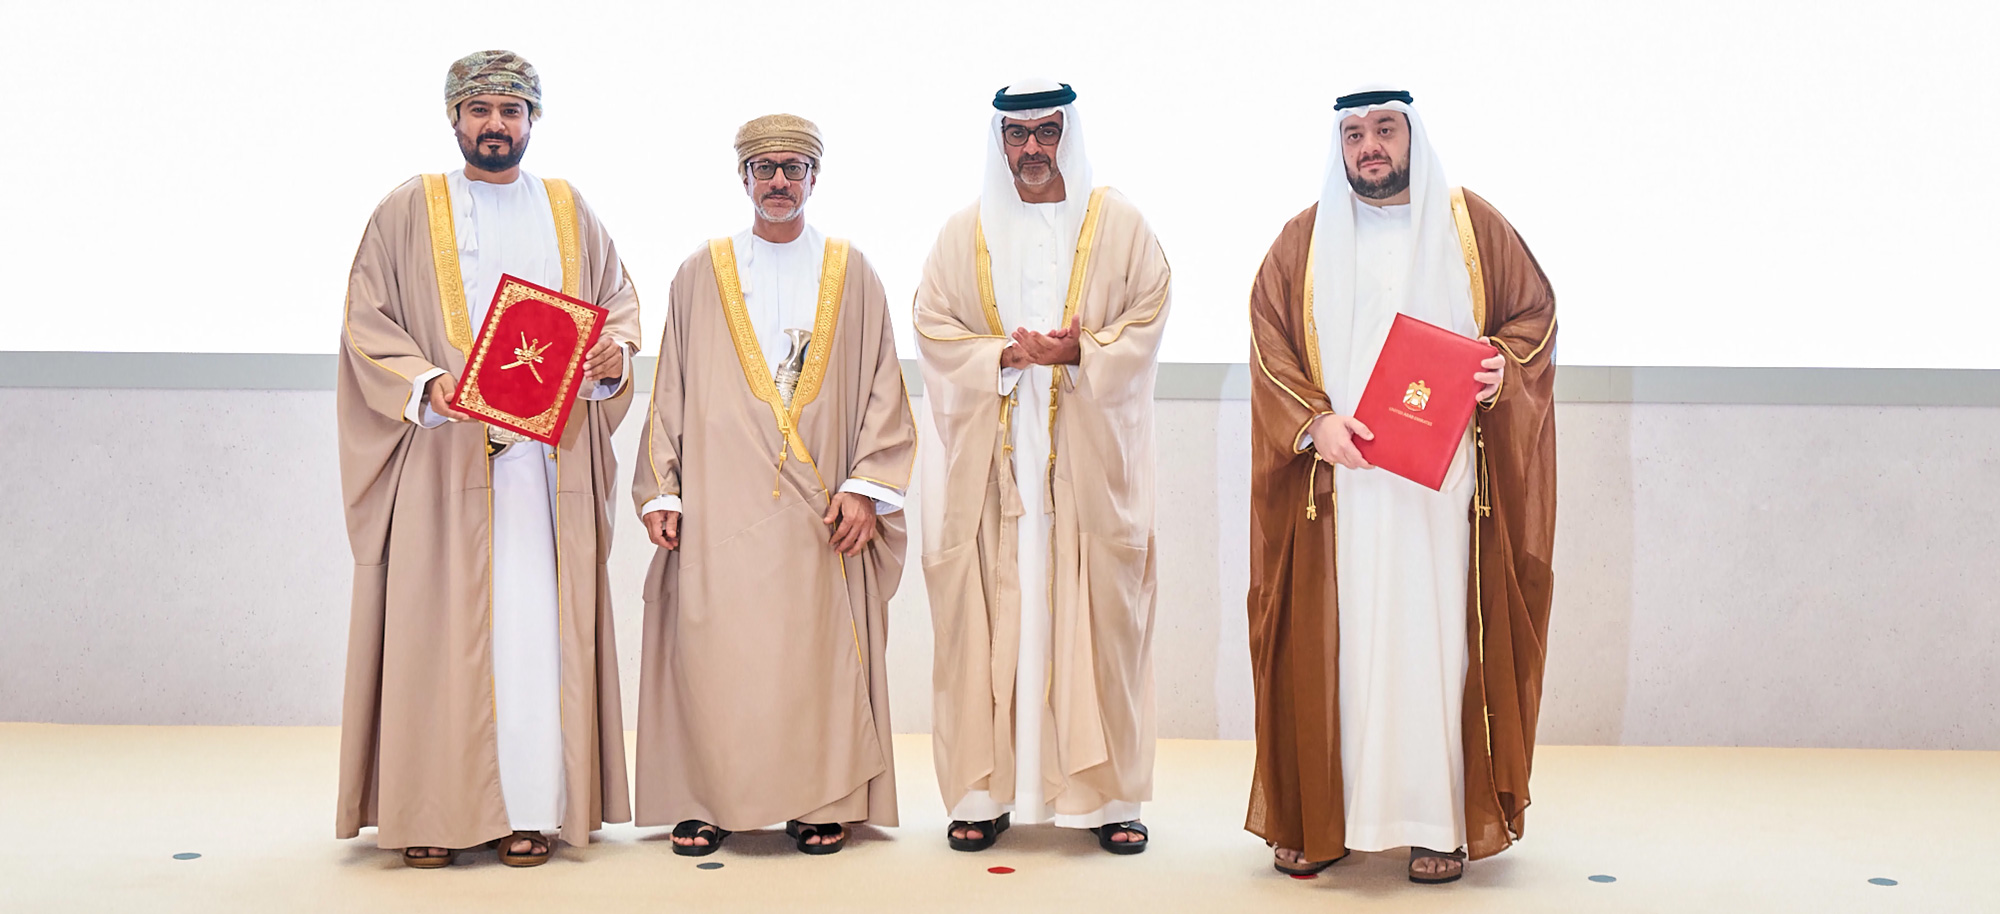 UAE and Oman establish investment partnerships worth AED129 billion to deepen cooperation across multiple sectors